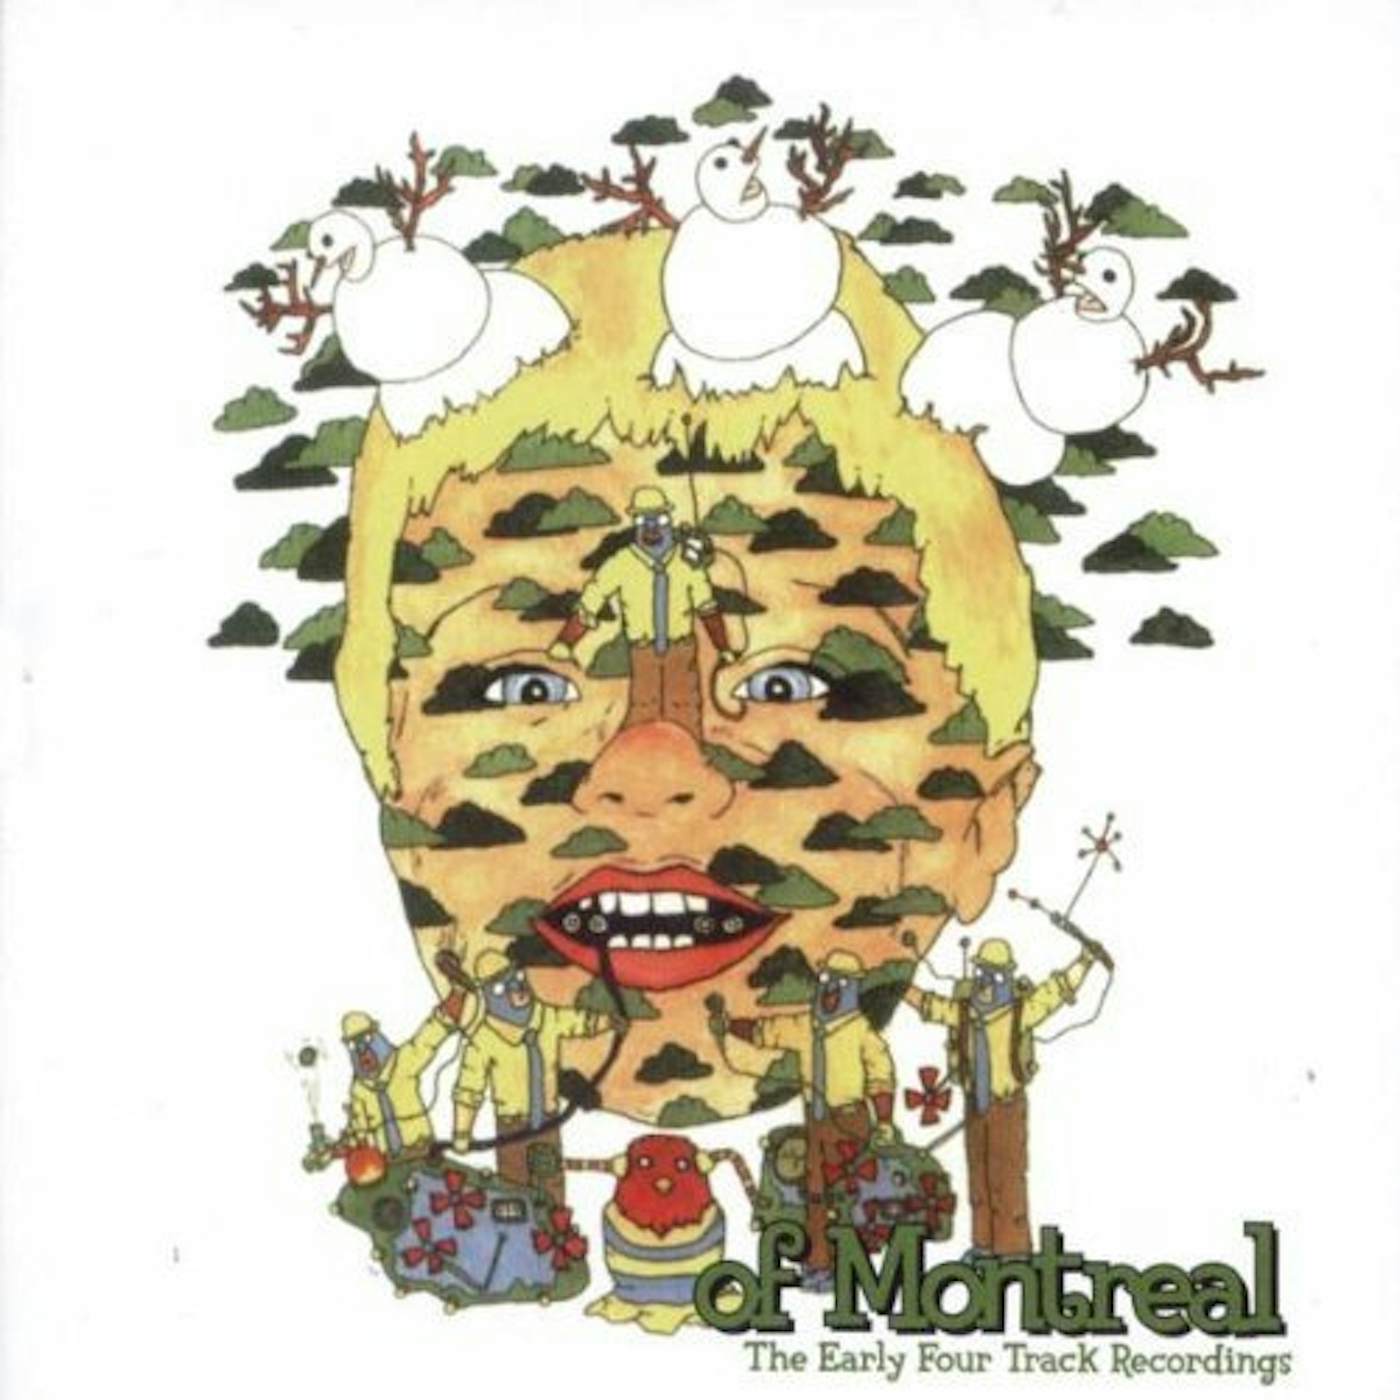 of Montreal EARLY FOUR TRACK RECORDINGS CD